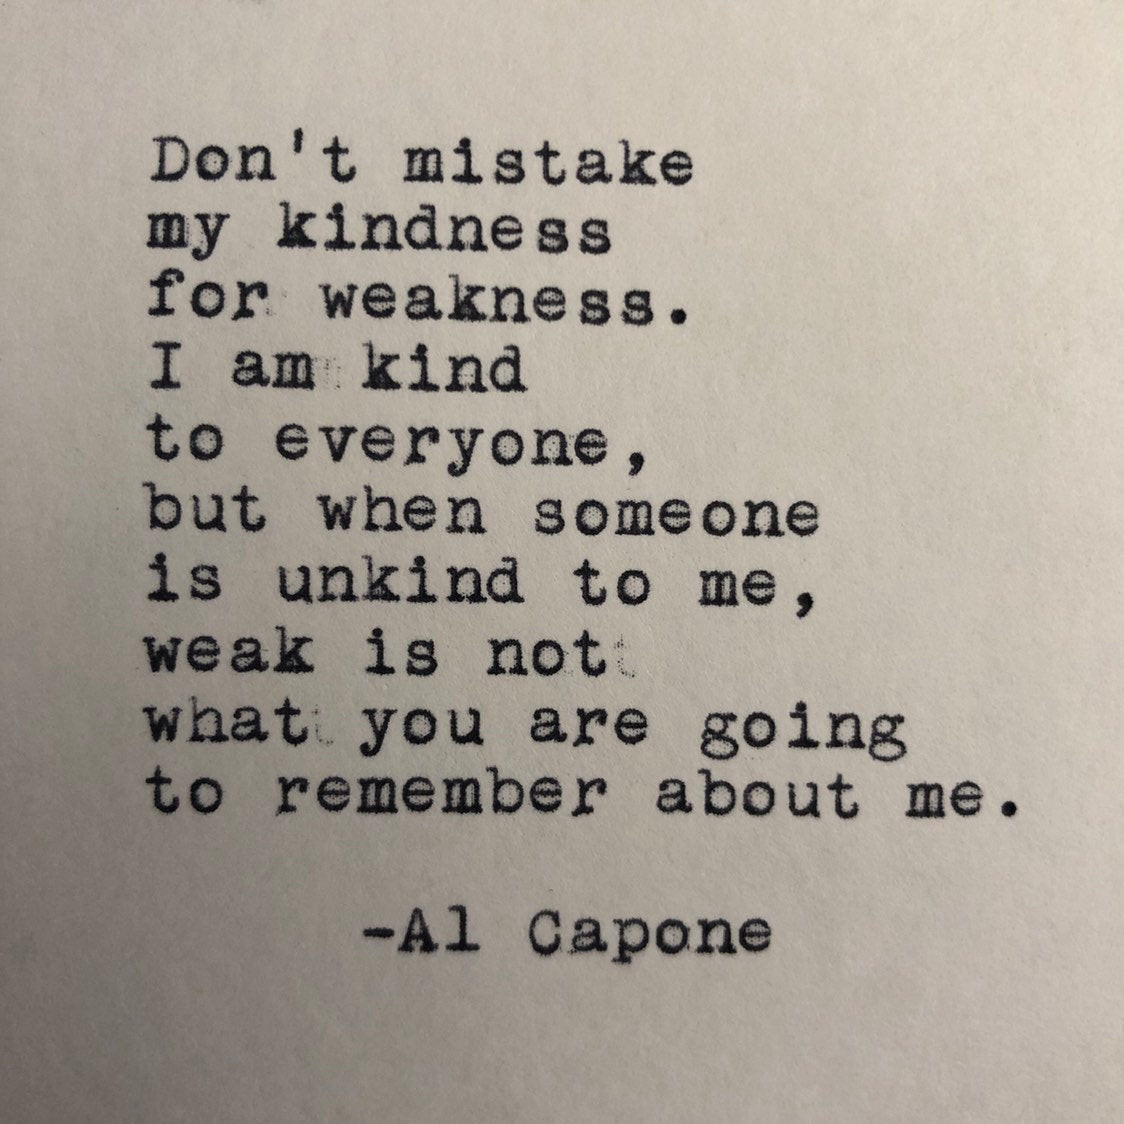 Al Capone Quote Kindness
 Al Capone Kindness Quote Typed on Typewriter